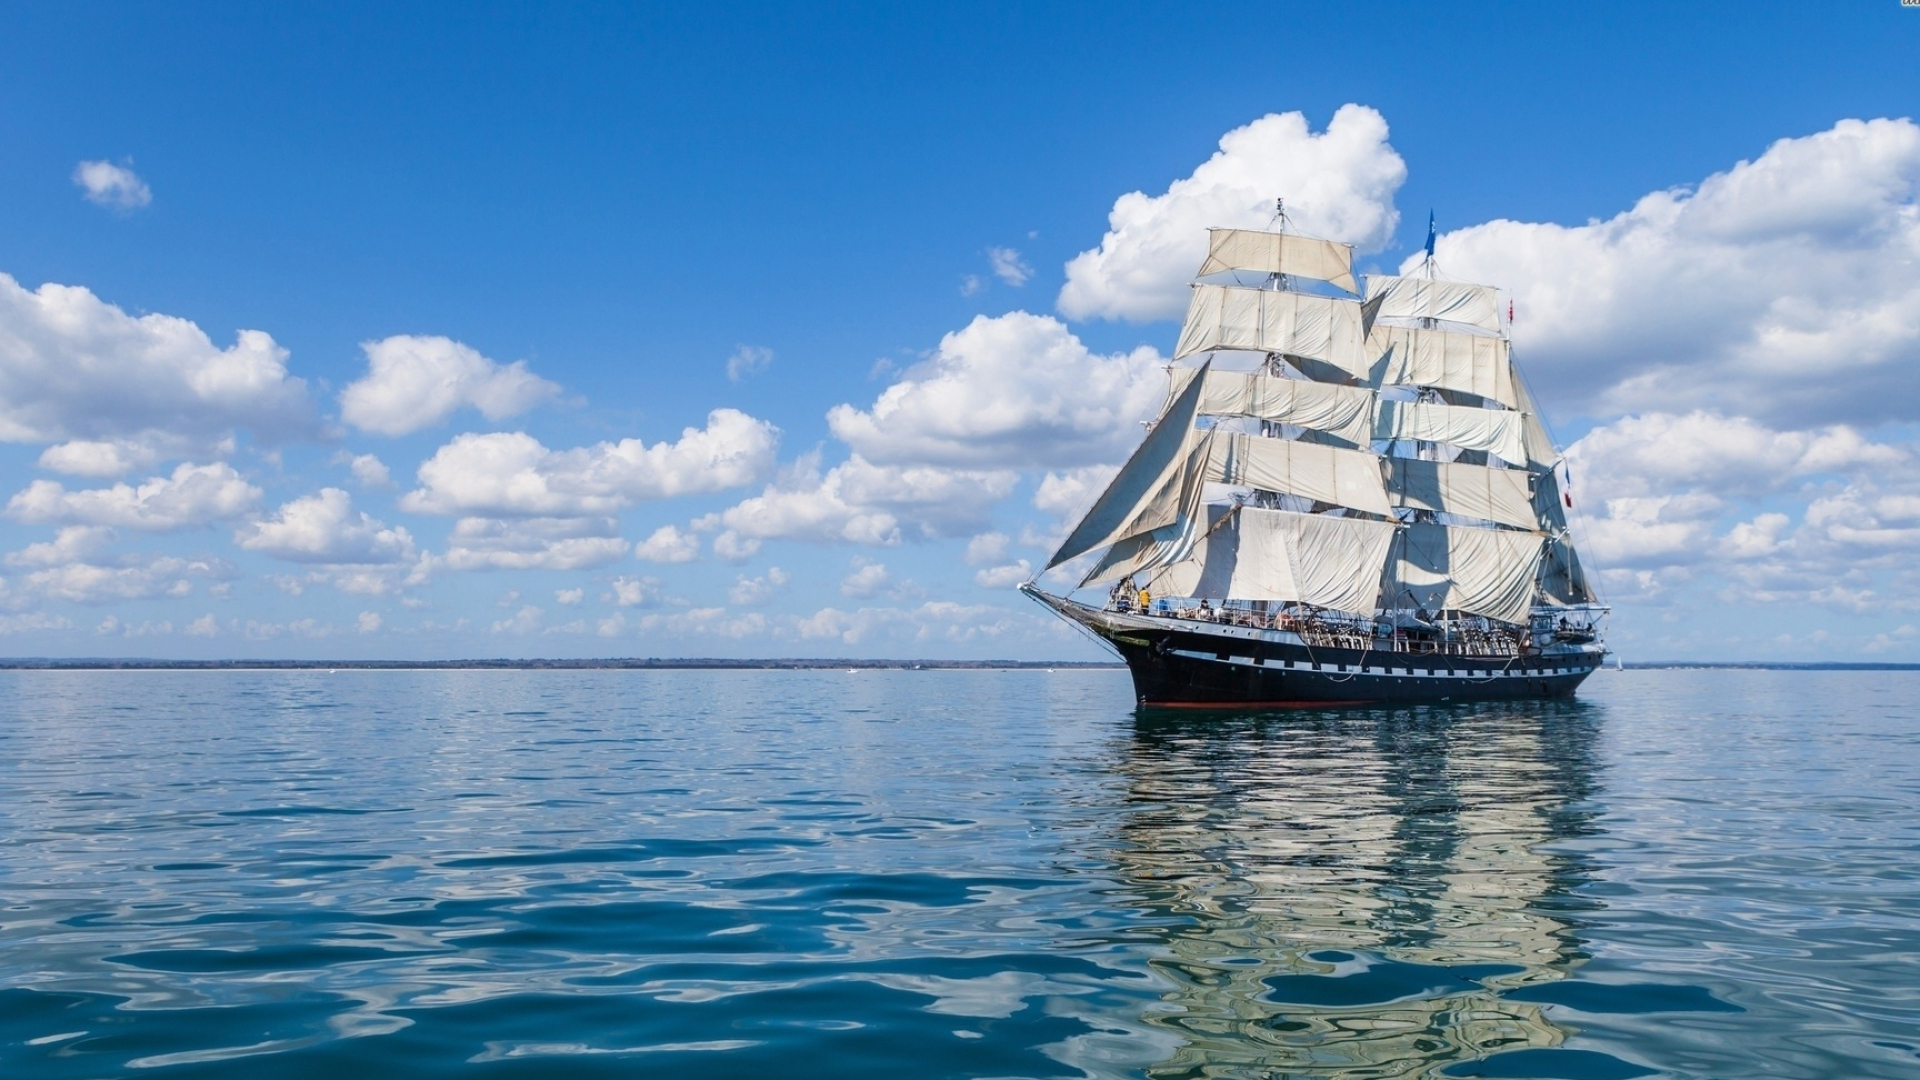 Windjammer: A ship with masts and sails, powered by the wind, A sea-going vessel. 1920x1080 Full HD Wallpaper.